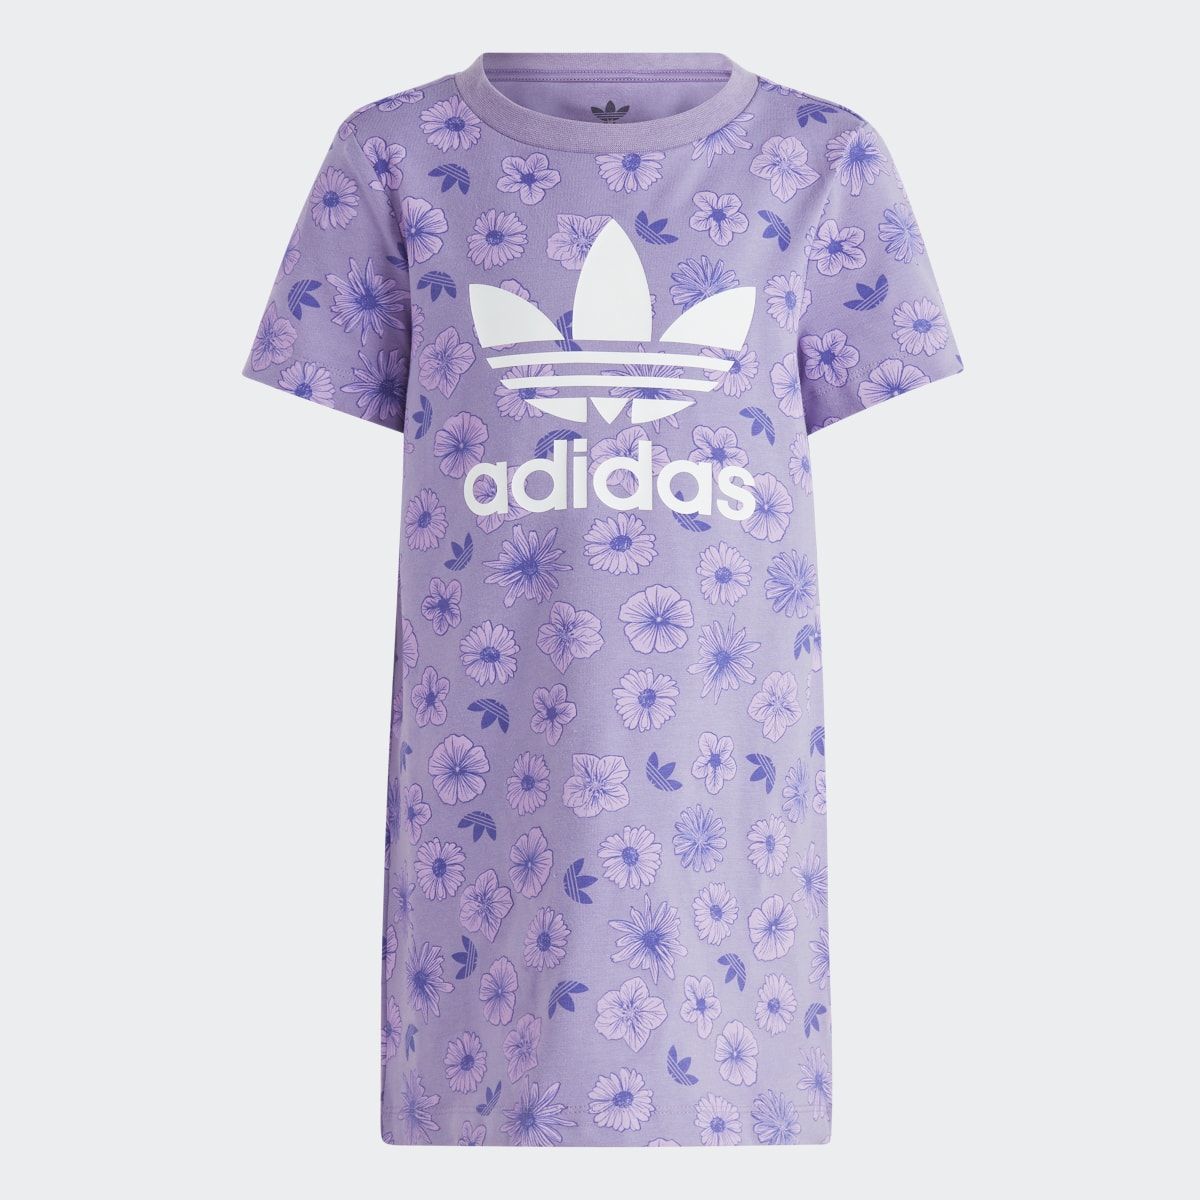 Adidas Completo Floral Dress. 5